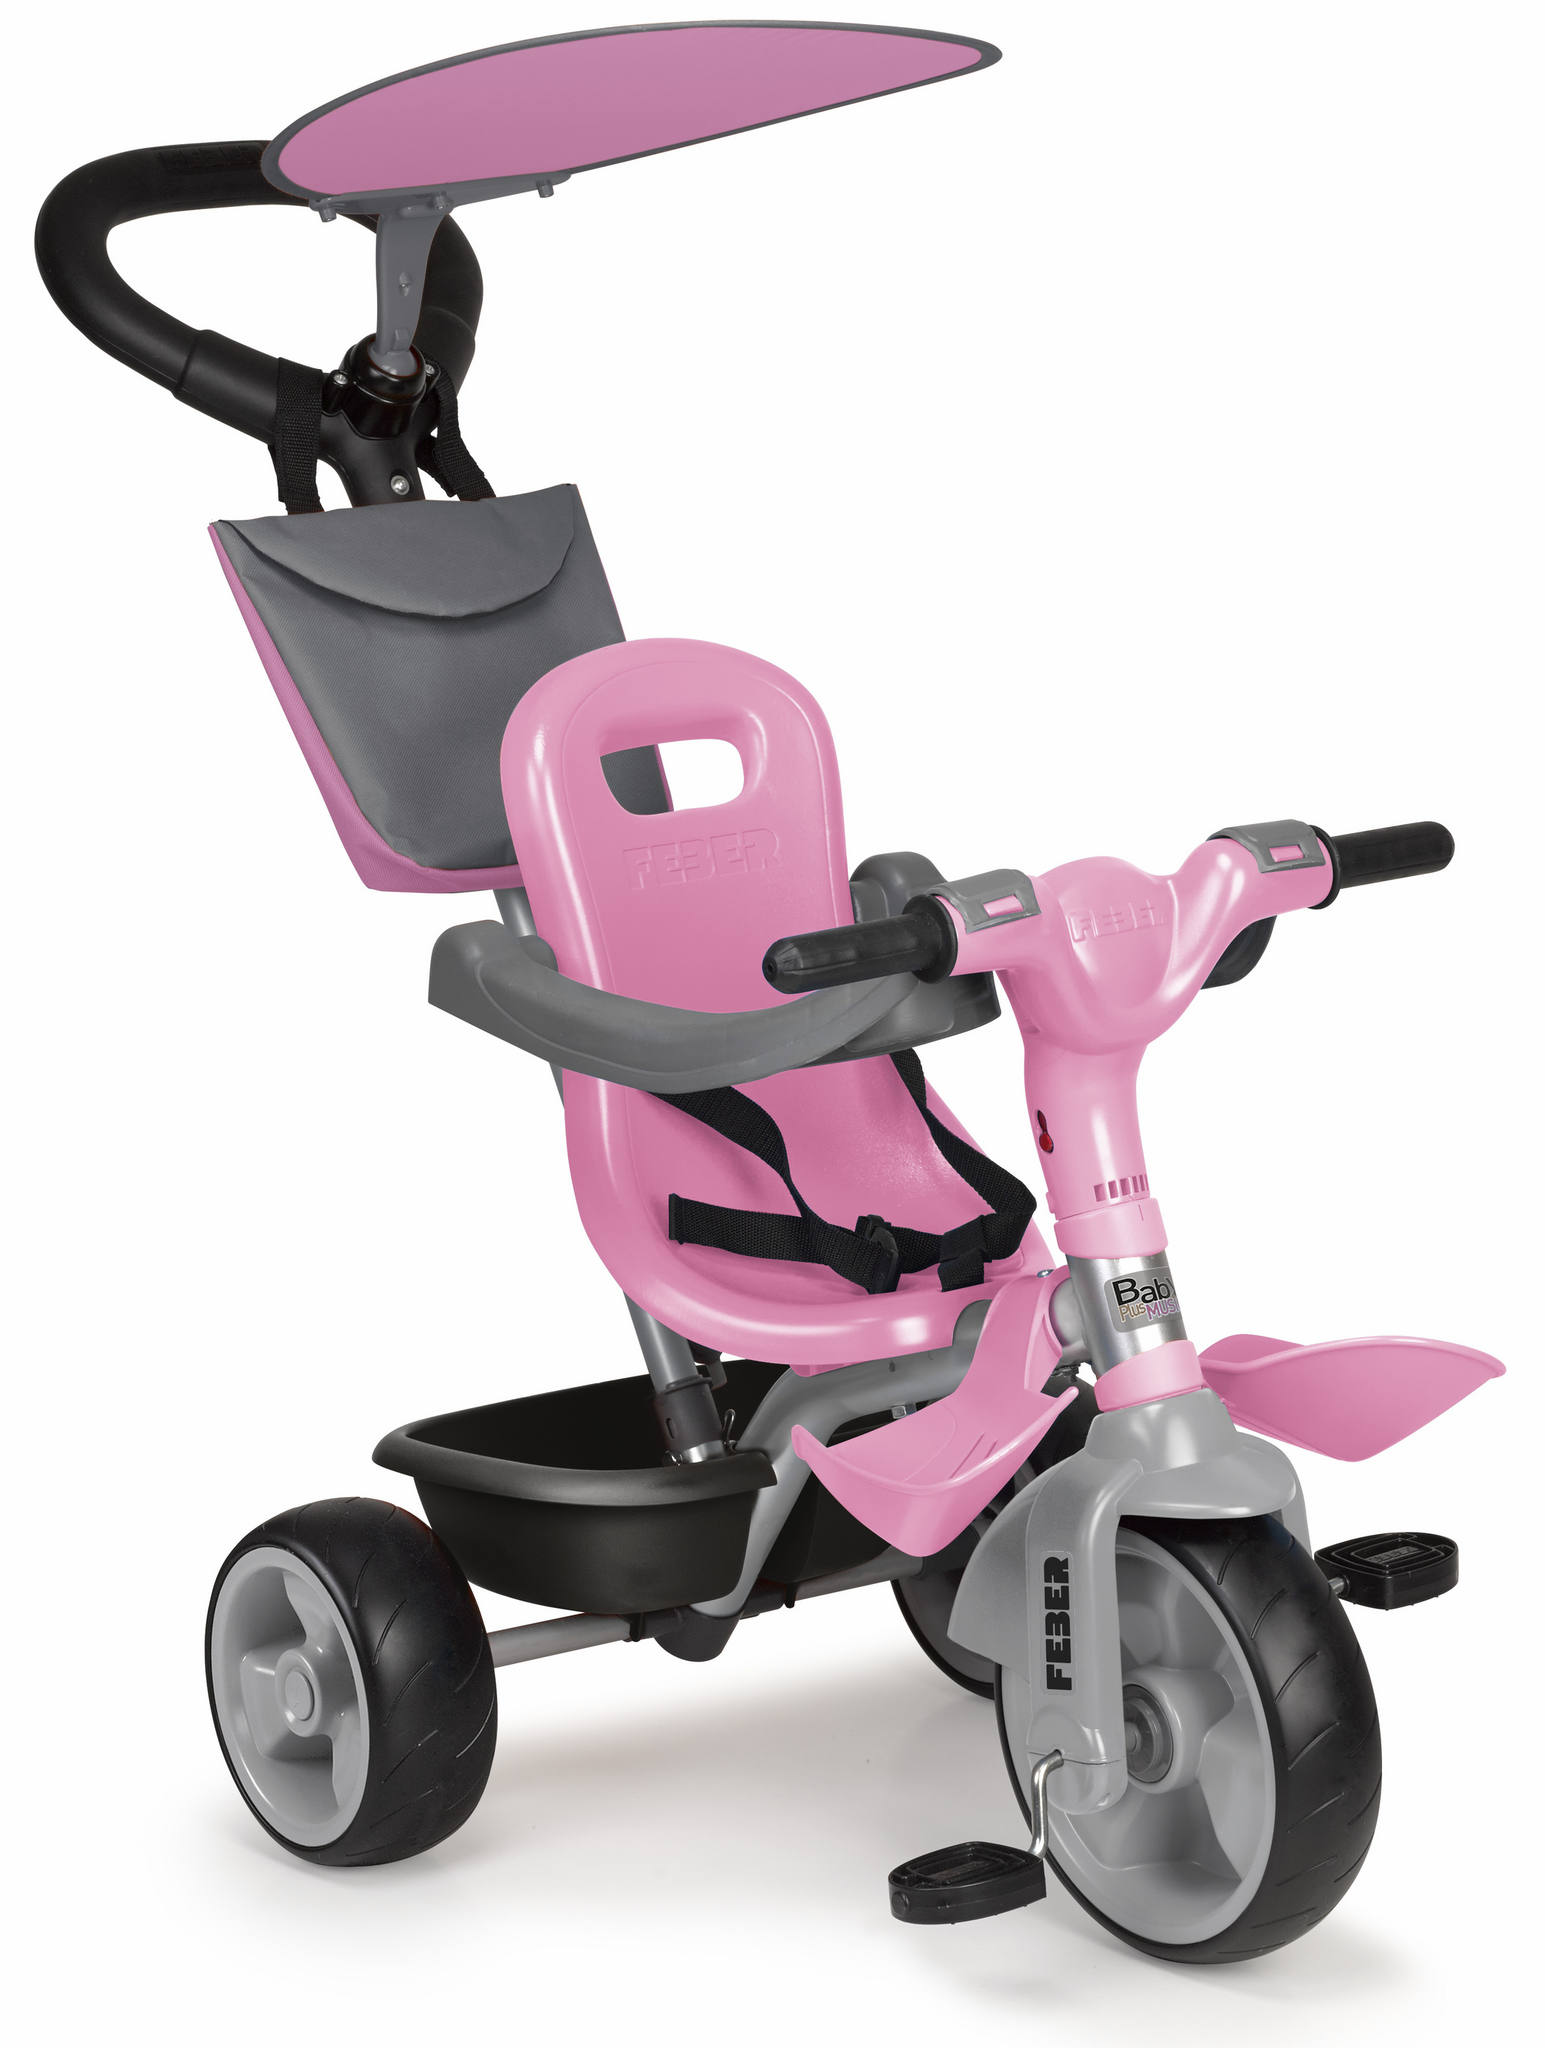 TRICICLO BABY PLUS MUSIC PINK 12132 - N16123